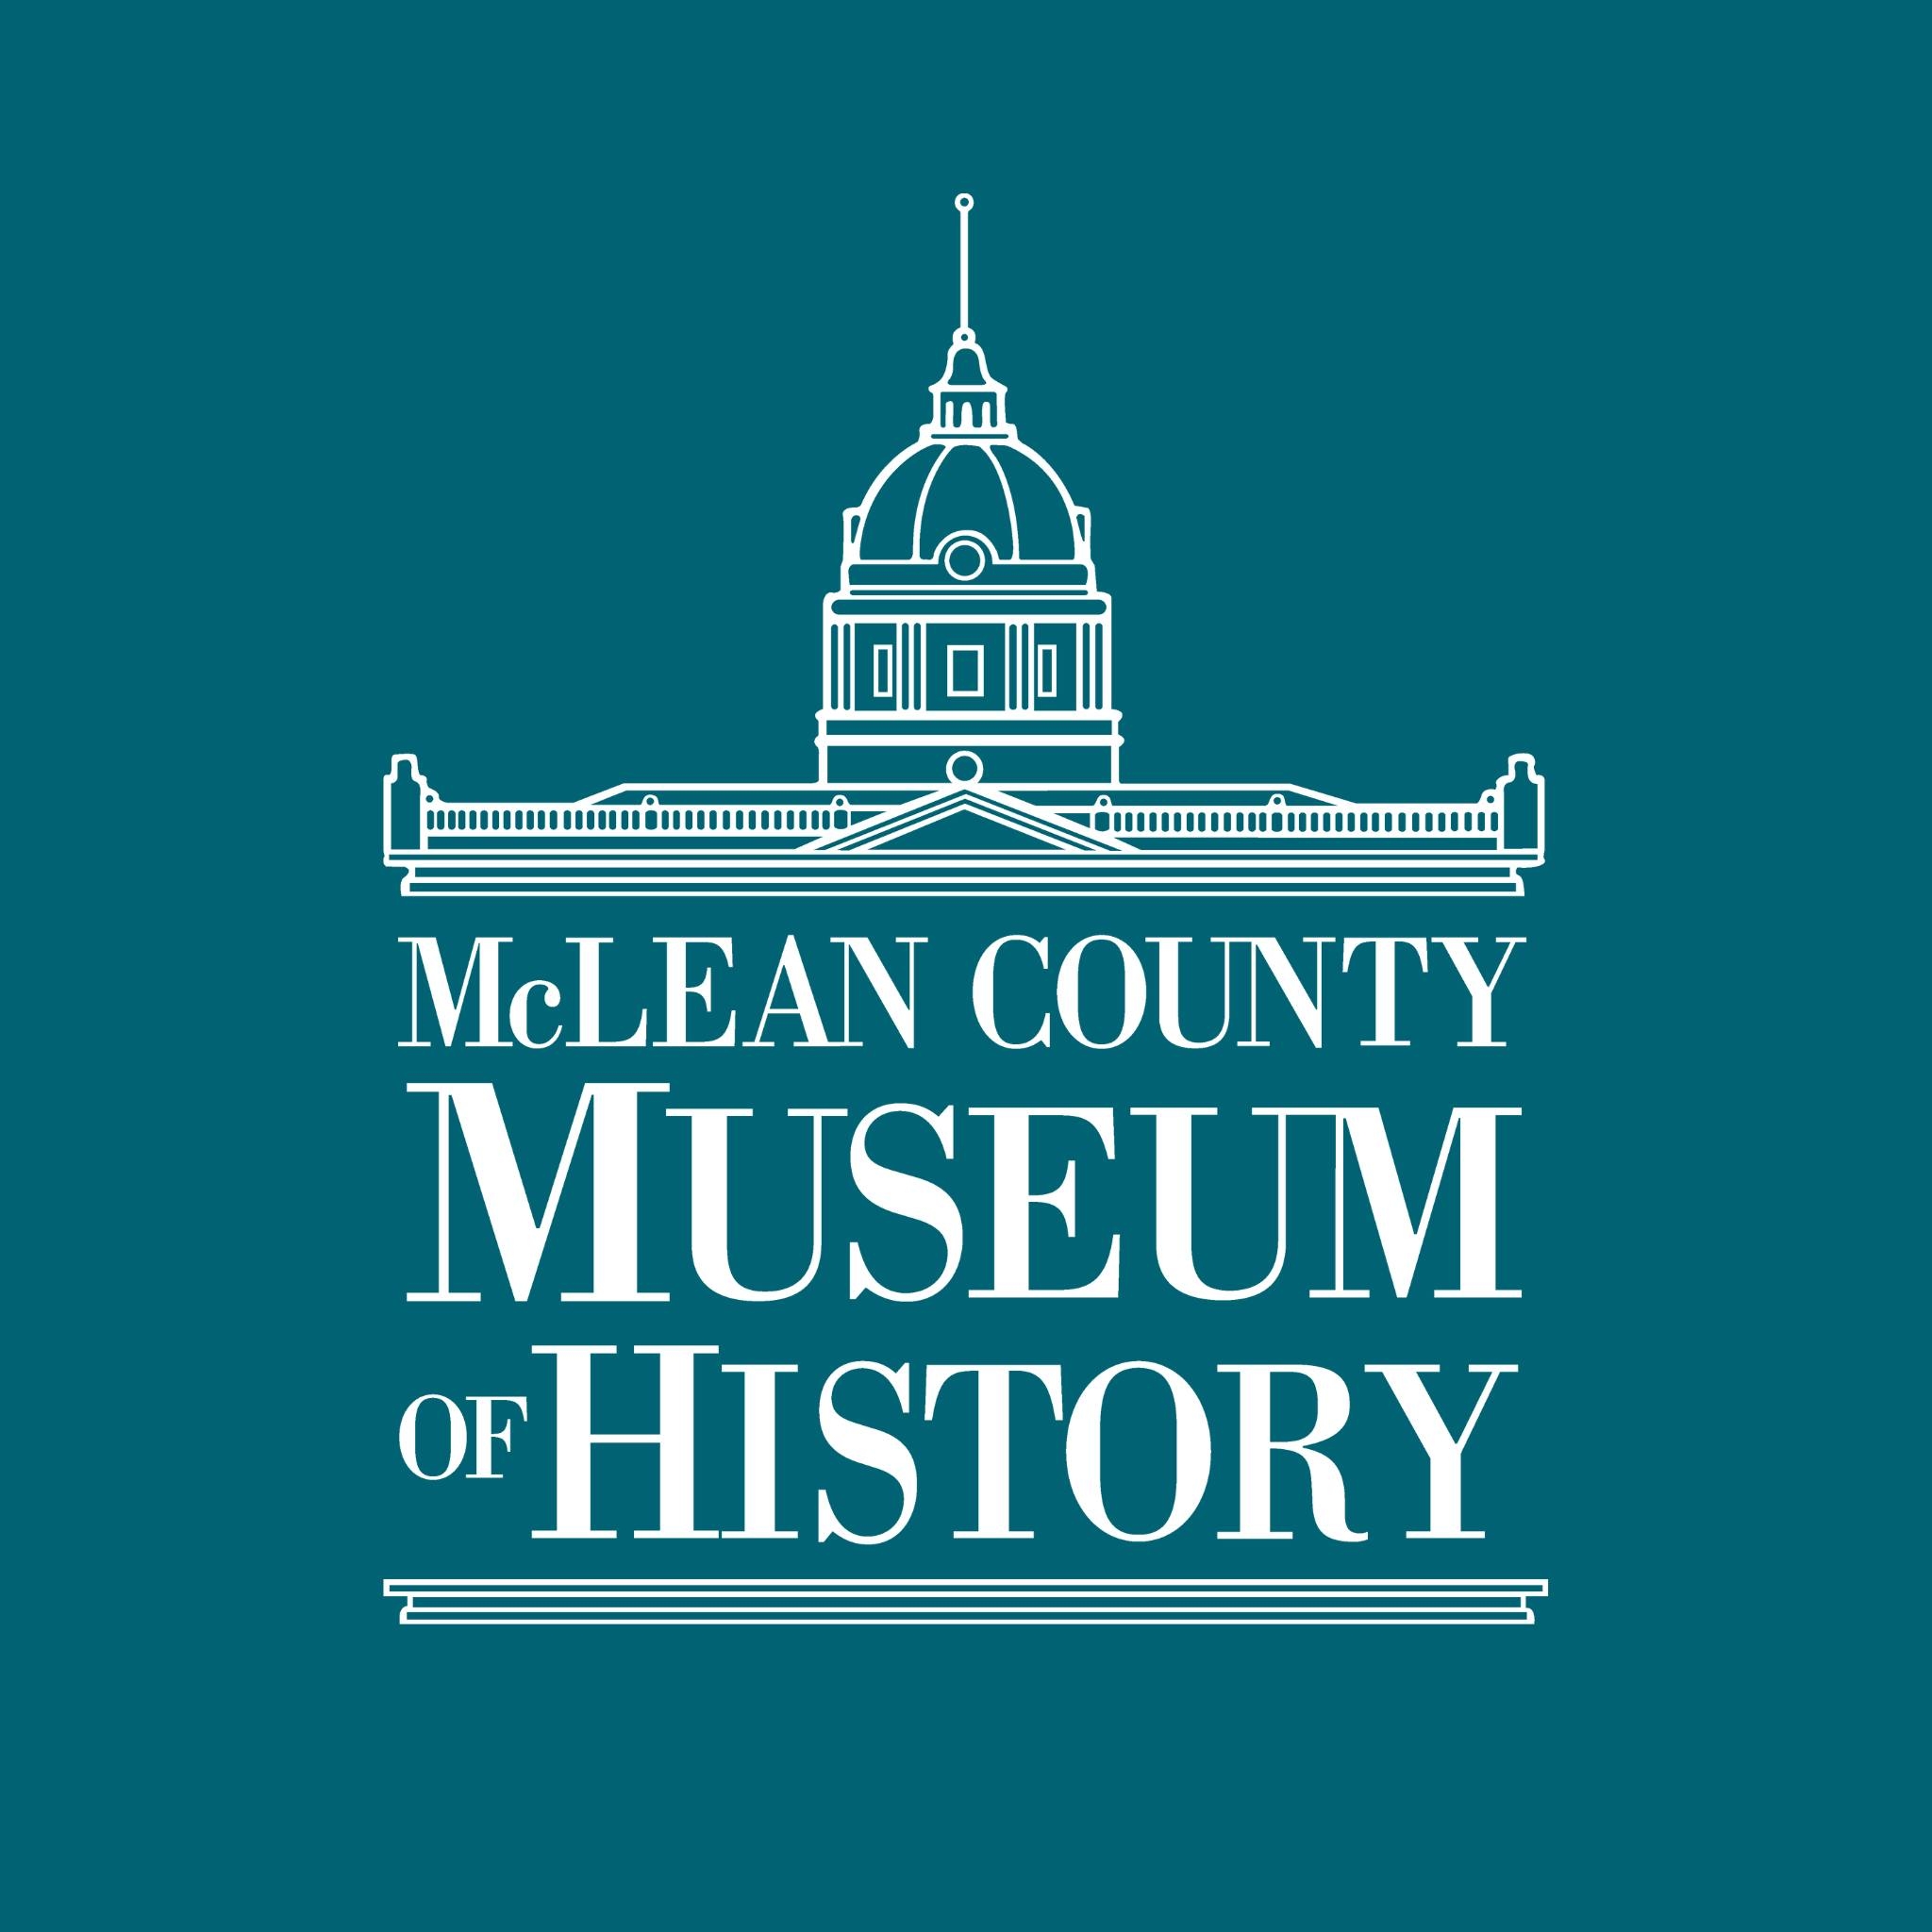 Six long-time McLean County residents to be honored as History Makers